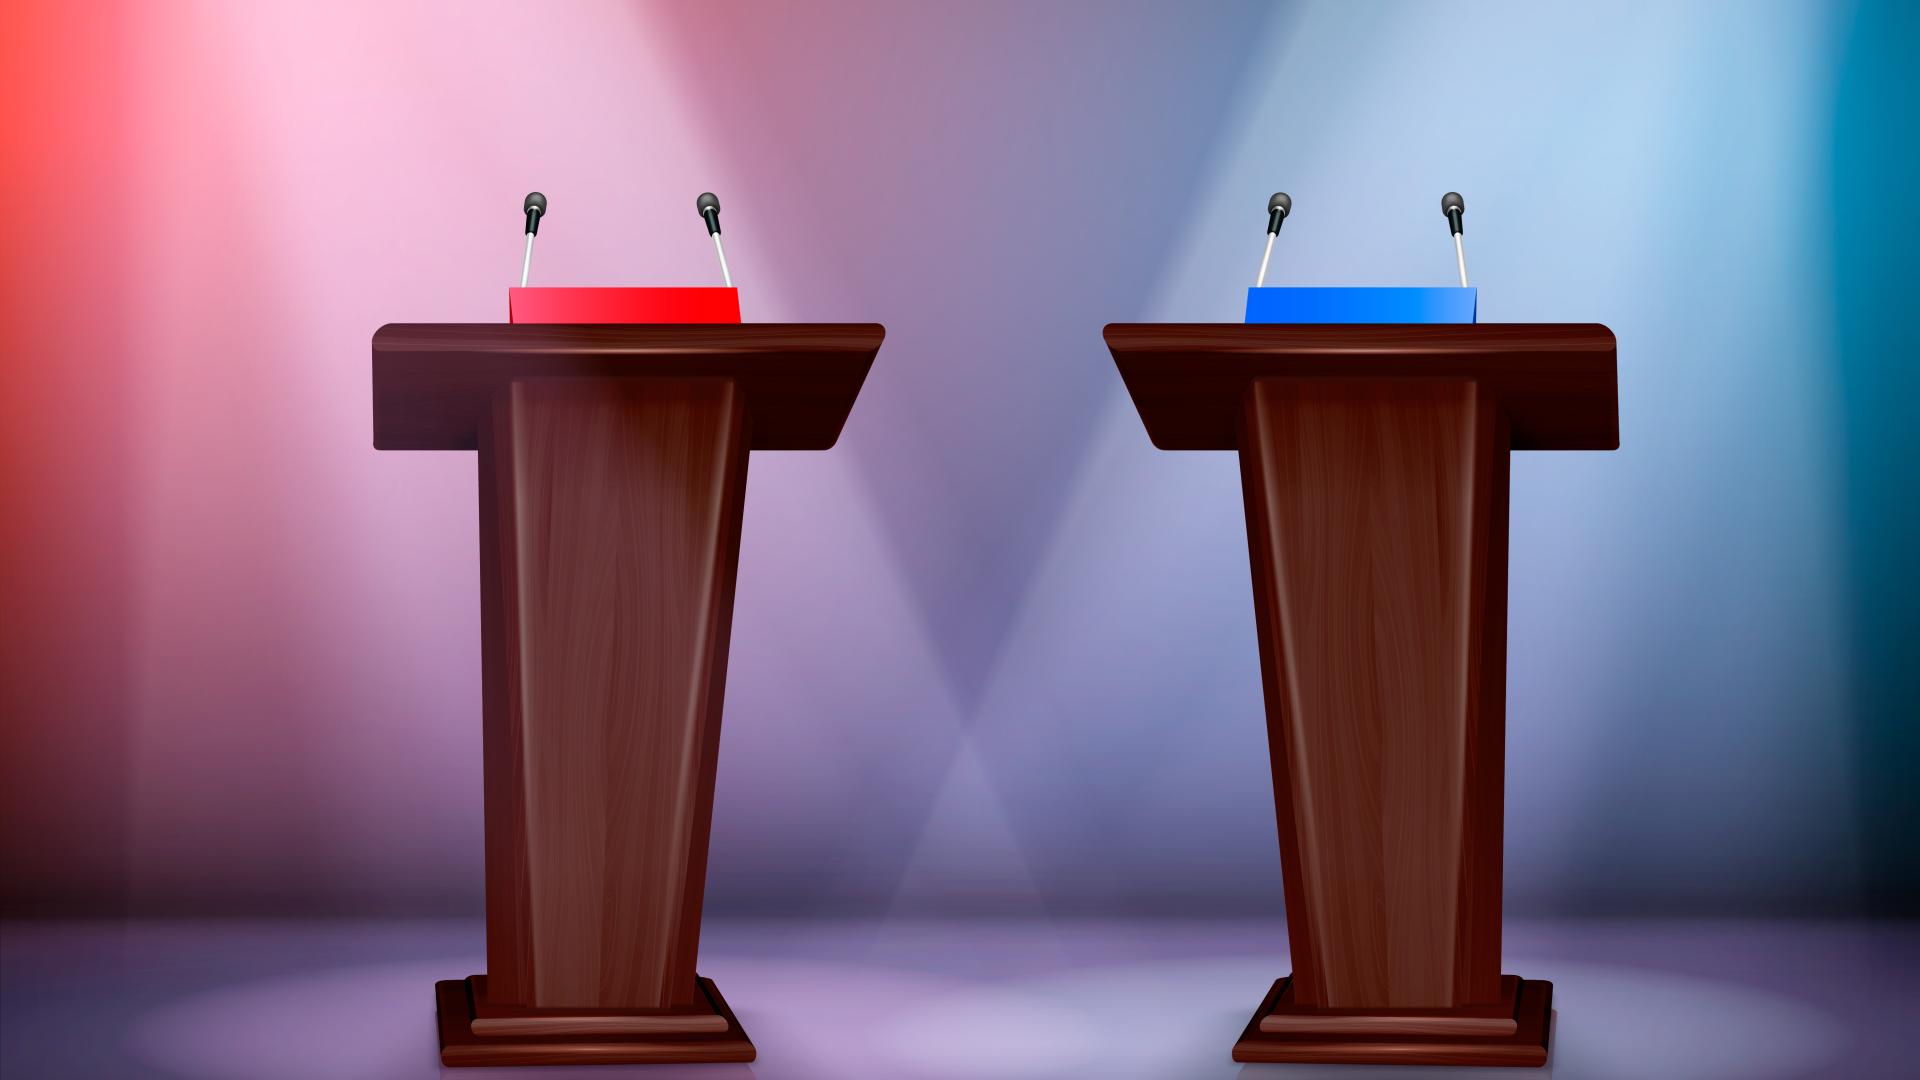 two tribunes for debate on stage illuminated by floodlights realistic colored composition 3d illustration